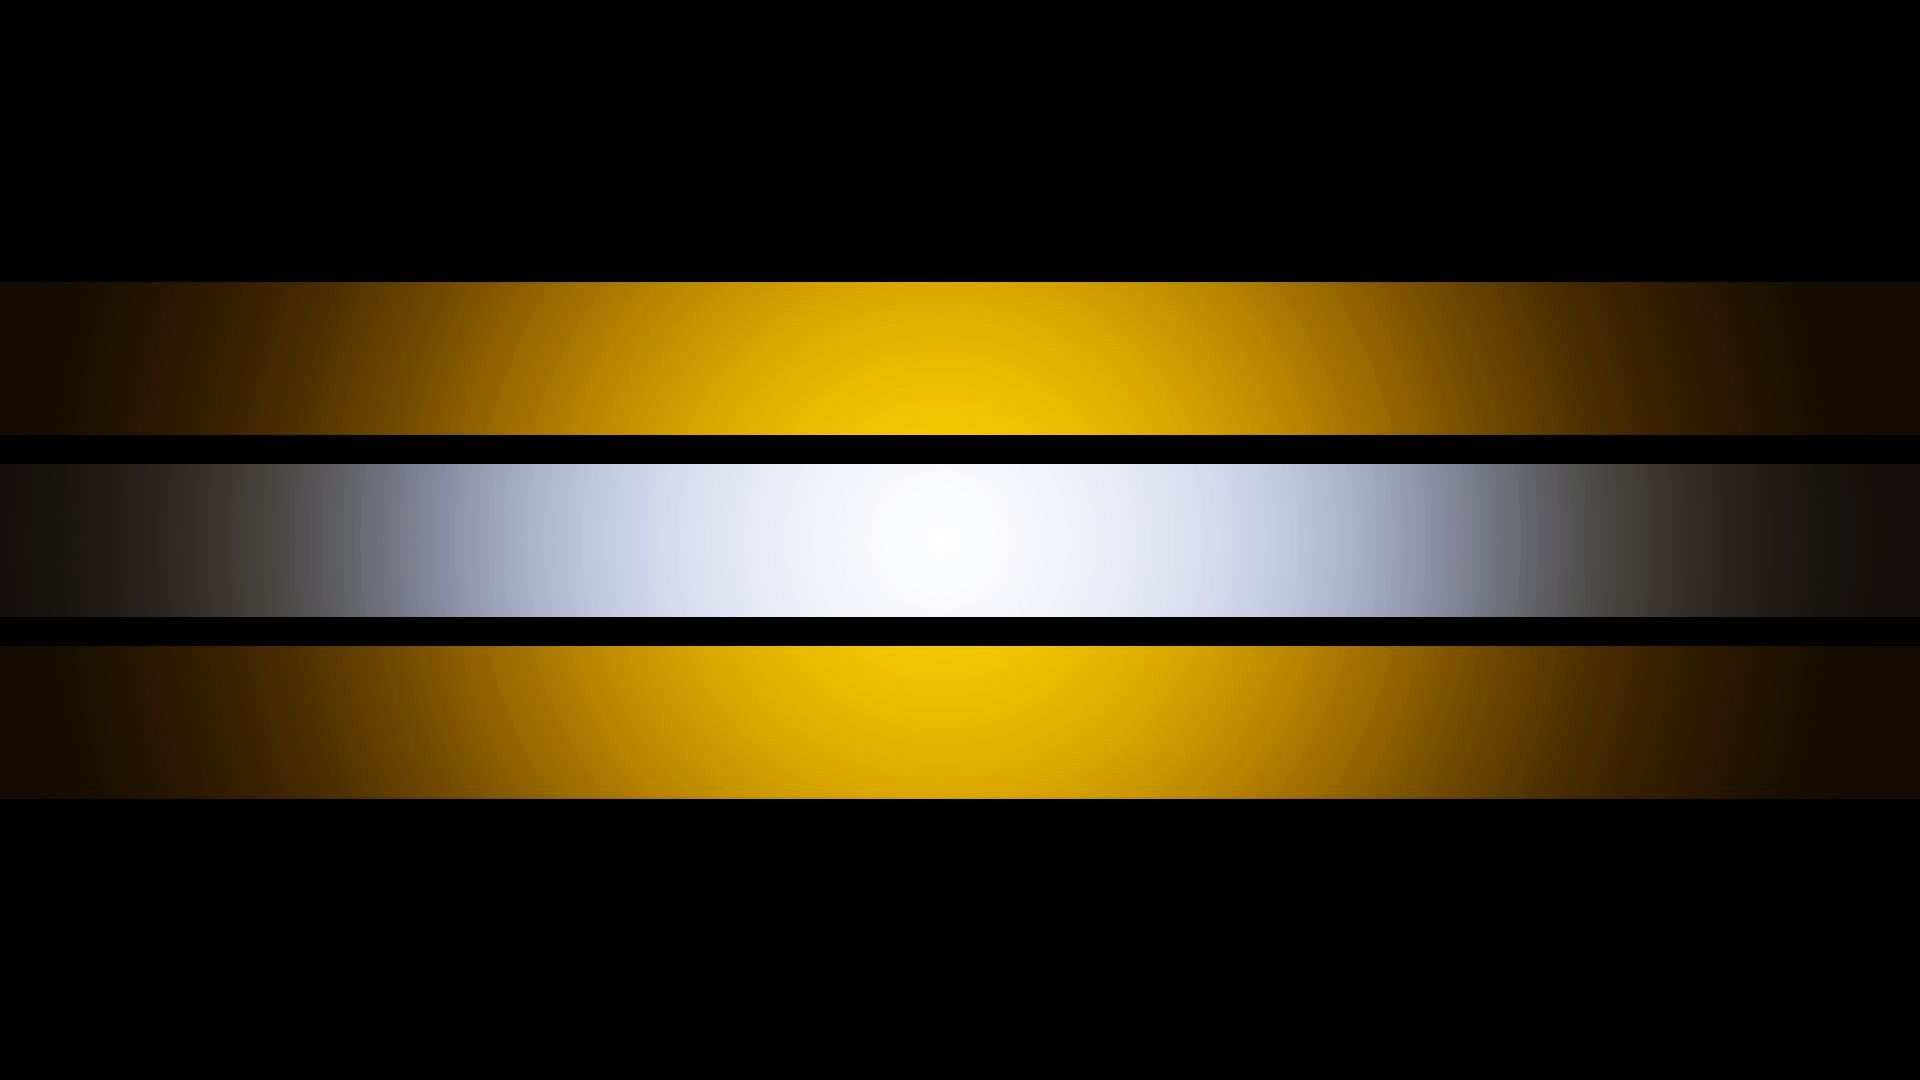 Yellow And Black Wallpapers